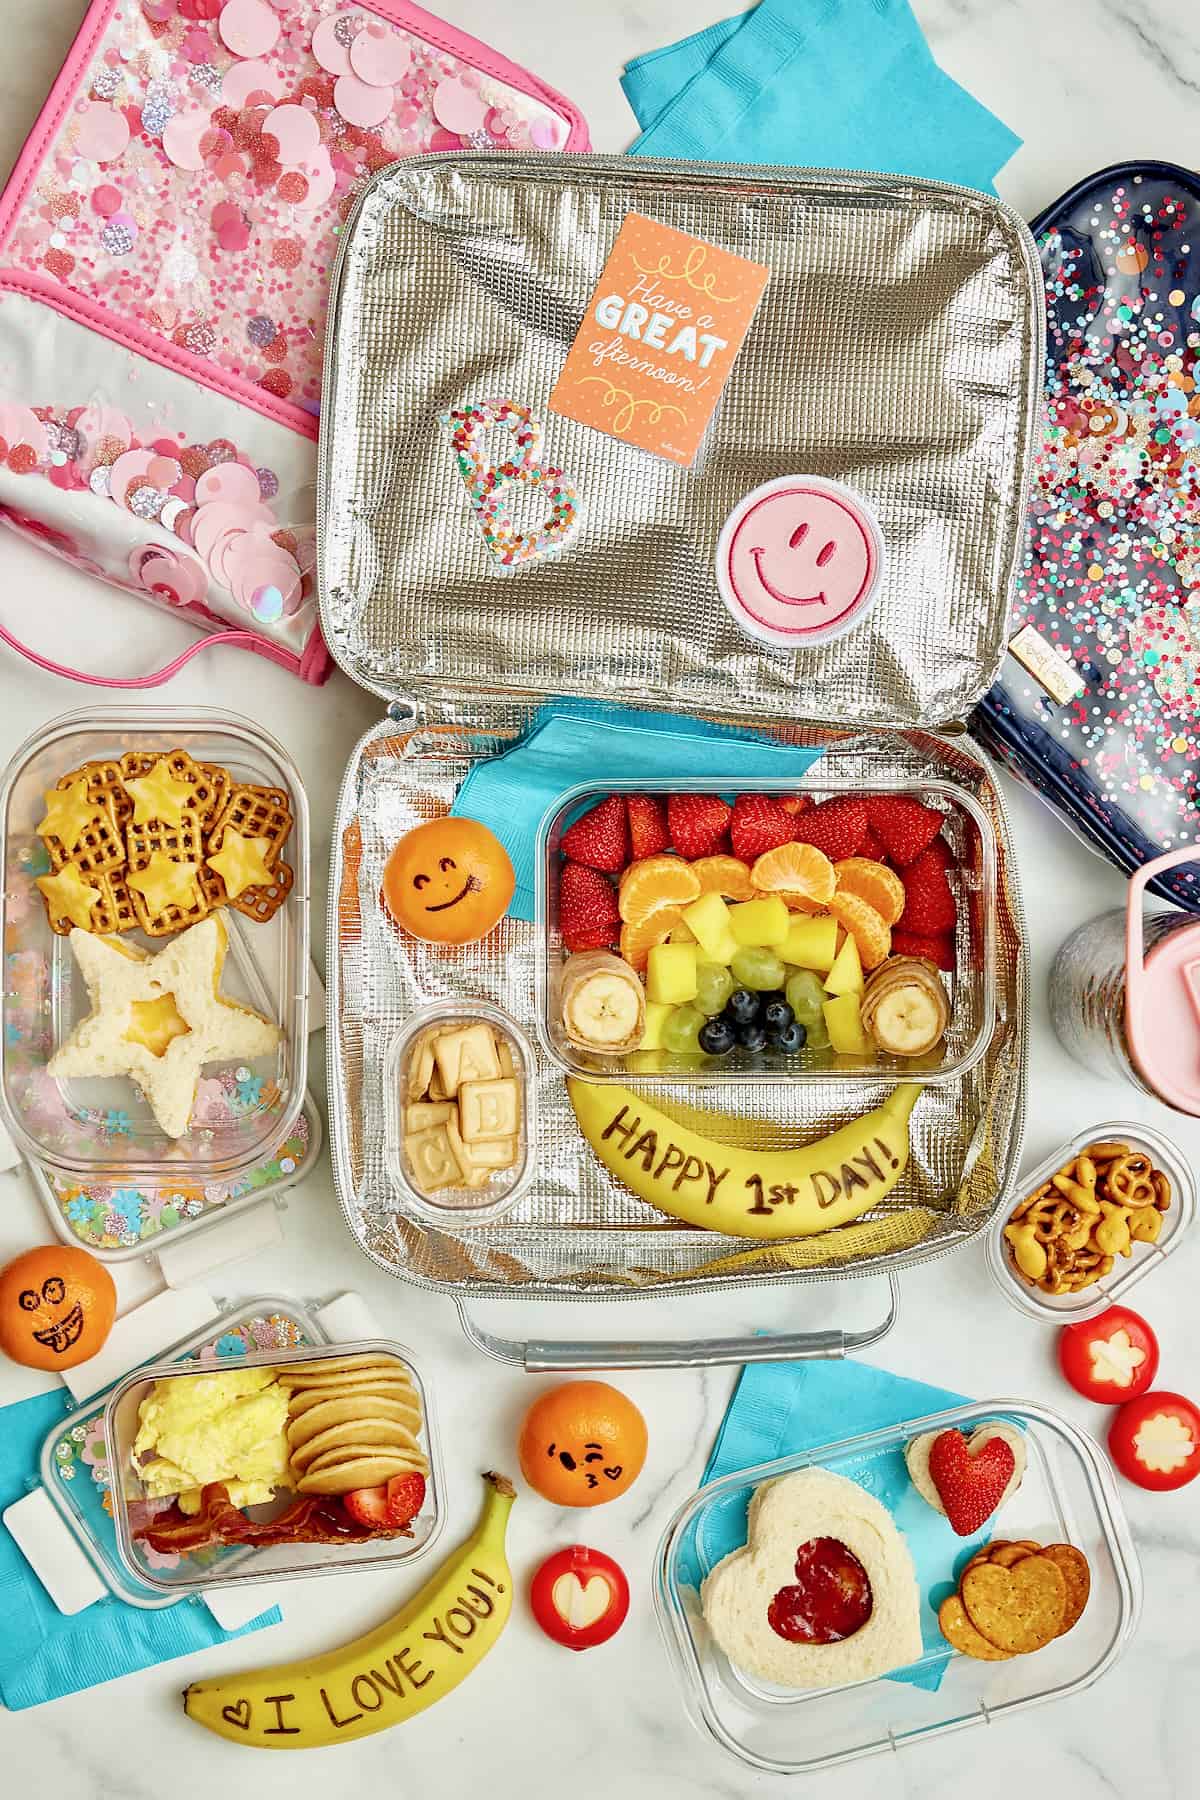 A lunch box with fruit arranged in a rainbow and a banana that says Happy First Day of School. Mini pancakes, scrambled eggs and sliced strawberries in a lunch box. A star shaped cheese sandwich, star shaped cheese slices on pretzels.